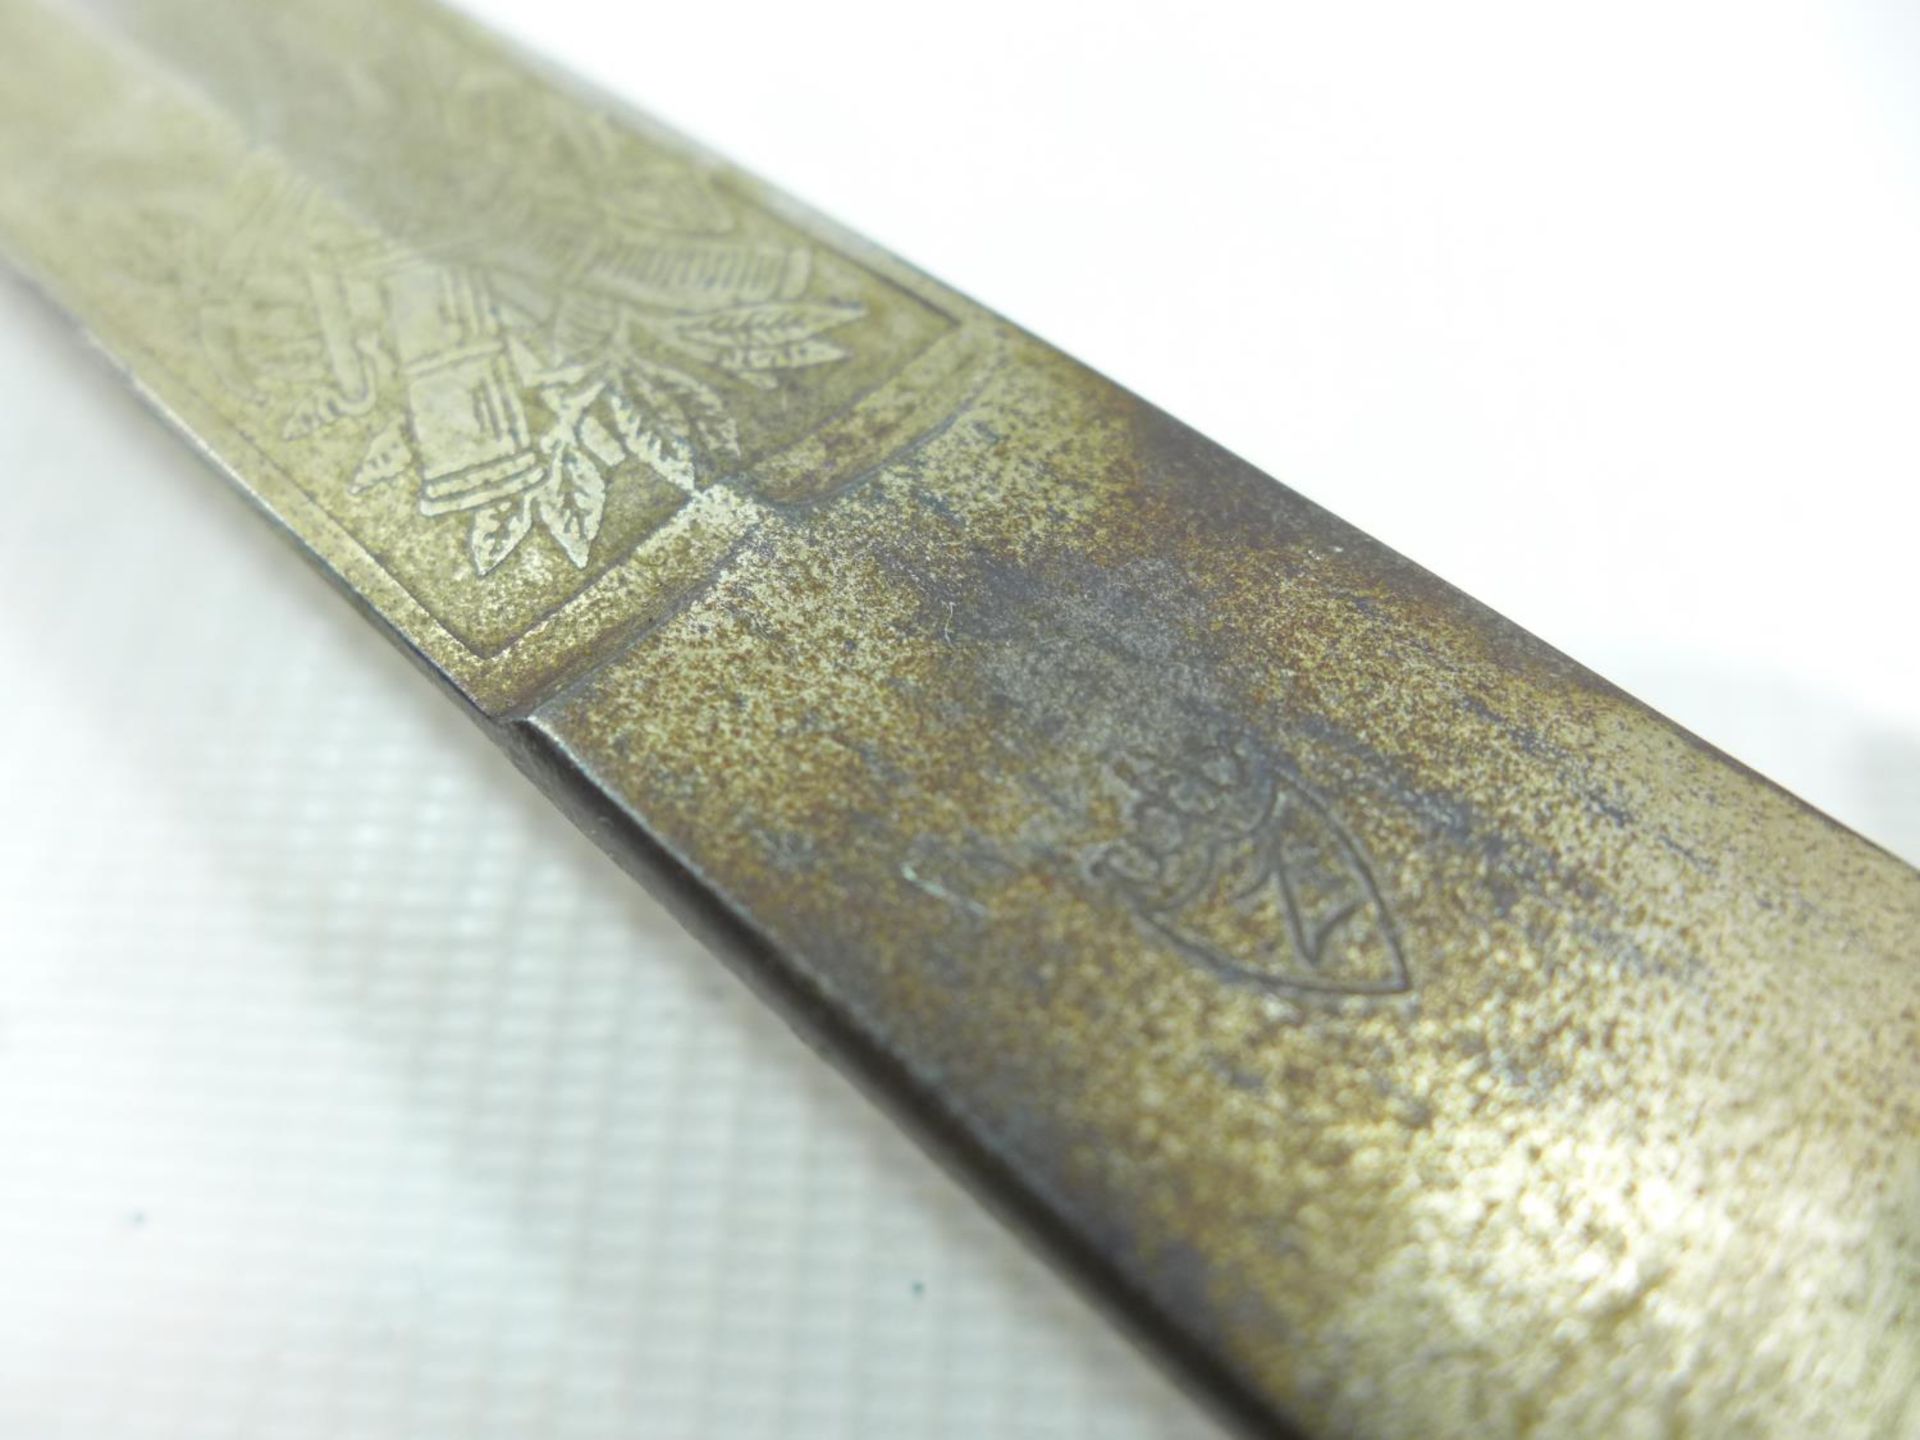 AN EARLY 20TH CENTURY GERMAN INFANTRY OFFICERS SWORD 80CM BLADE WITH ACID ETCHED DECORATION - Image 6 of 6